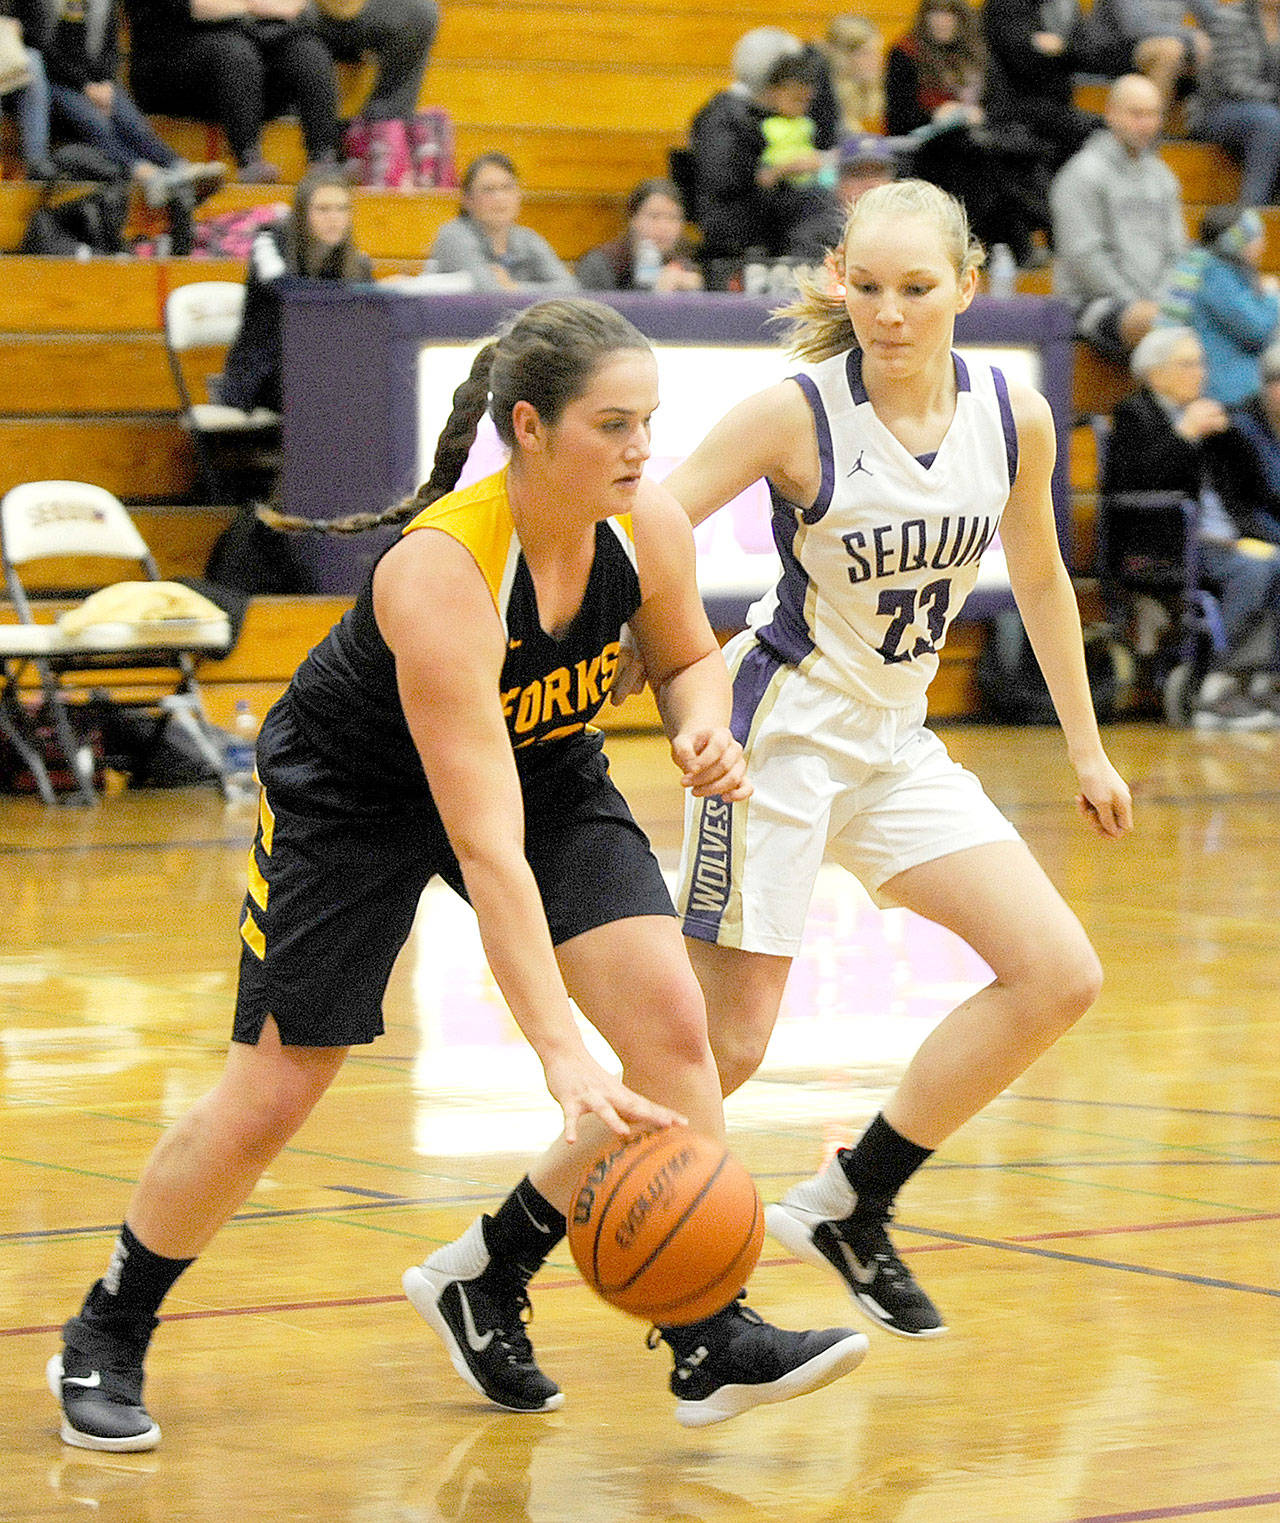 Forks’ Rian Peters, left, is one of the Spartans mainstays returning this season. Defending her is Sequim’s Melissa Porter in a game last season. (Michael Dashiell/Olympic Peninsula News Group)